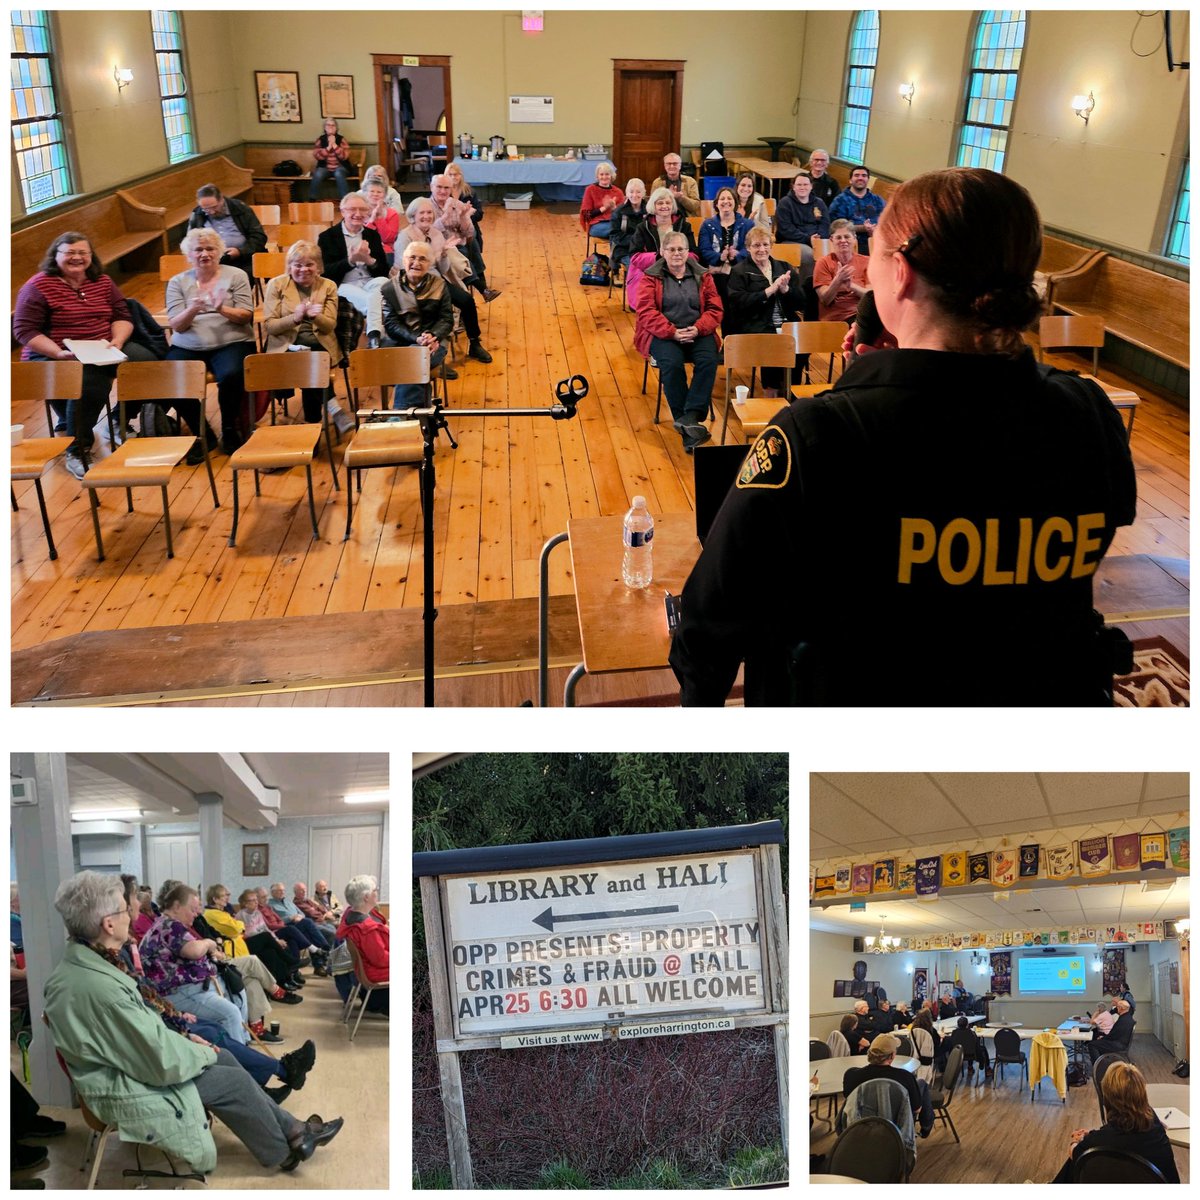 #oxfordopp was honoured to be invited to 3 seperate fraud prevention presentations this week @Ingersoll @Springford @Harrington @OxfordCounty
If you would like a presentation in your community please contact OPP @ 1-888-310-1122 & ask to speak to the Community Safety Officer ^rc